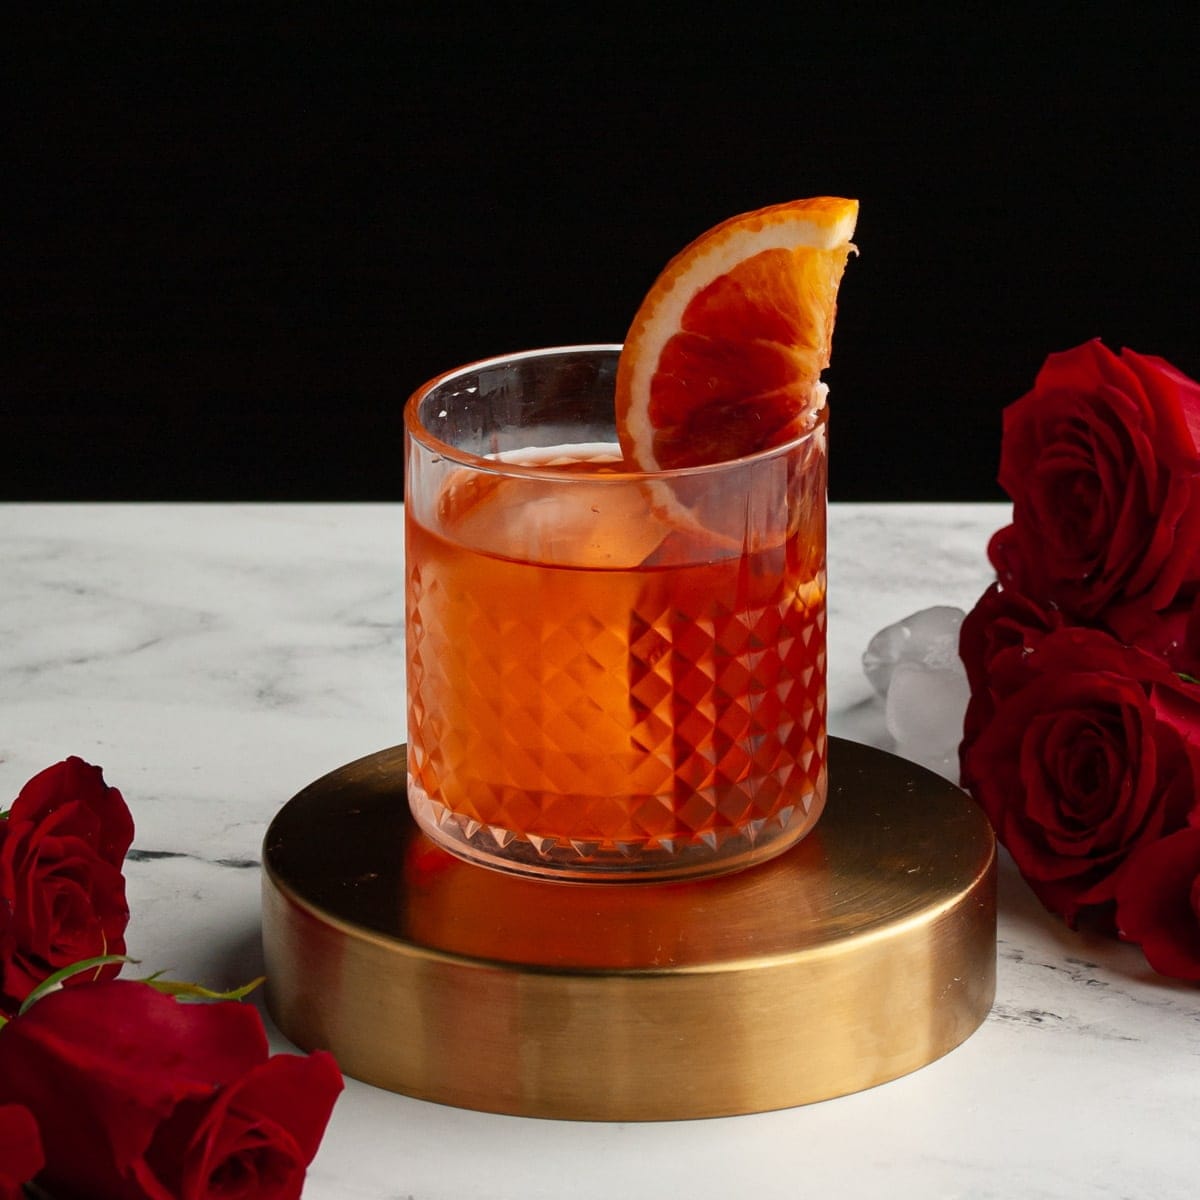 Aperol Negroni in an Old Fashioned glass garnished with blood orange